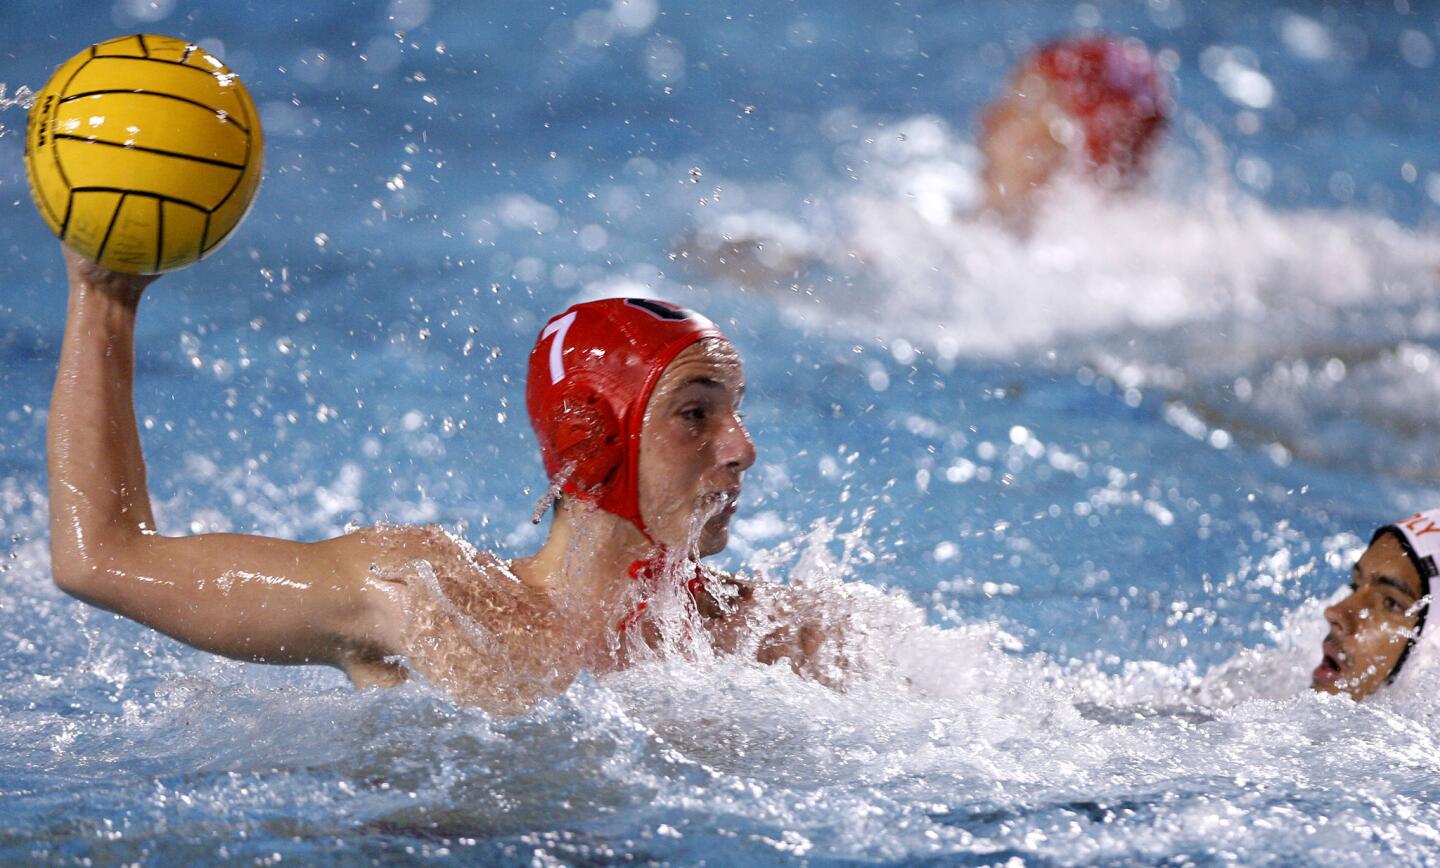 Photo Gallery: Glendale High advances to finals in Boys Water Polo